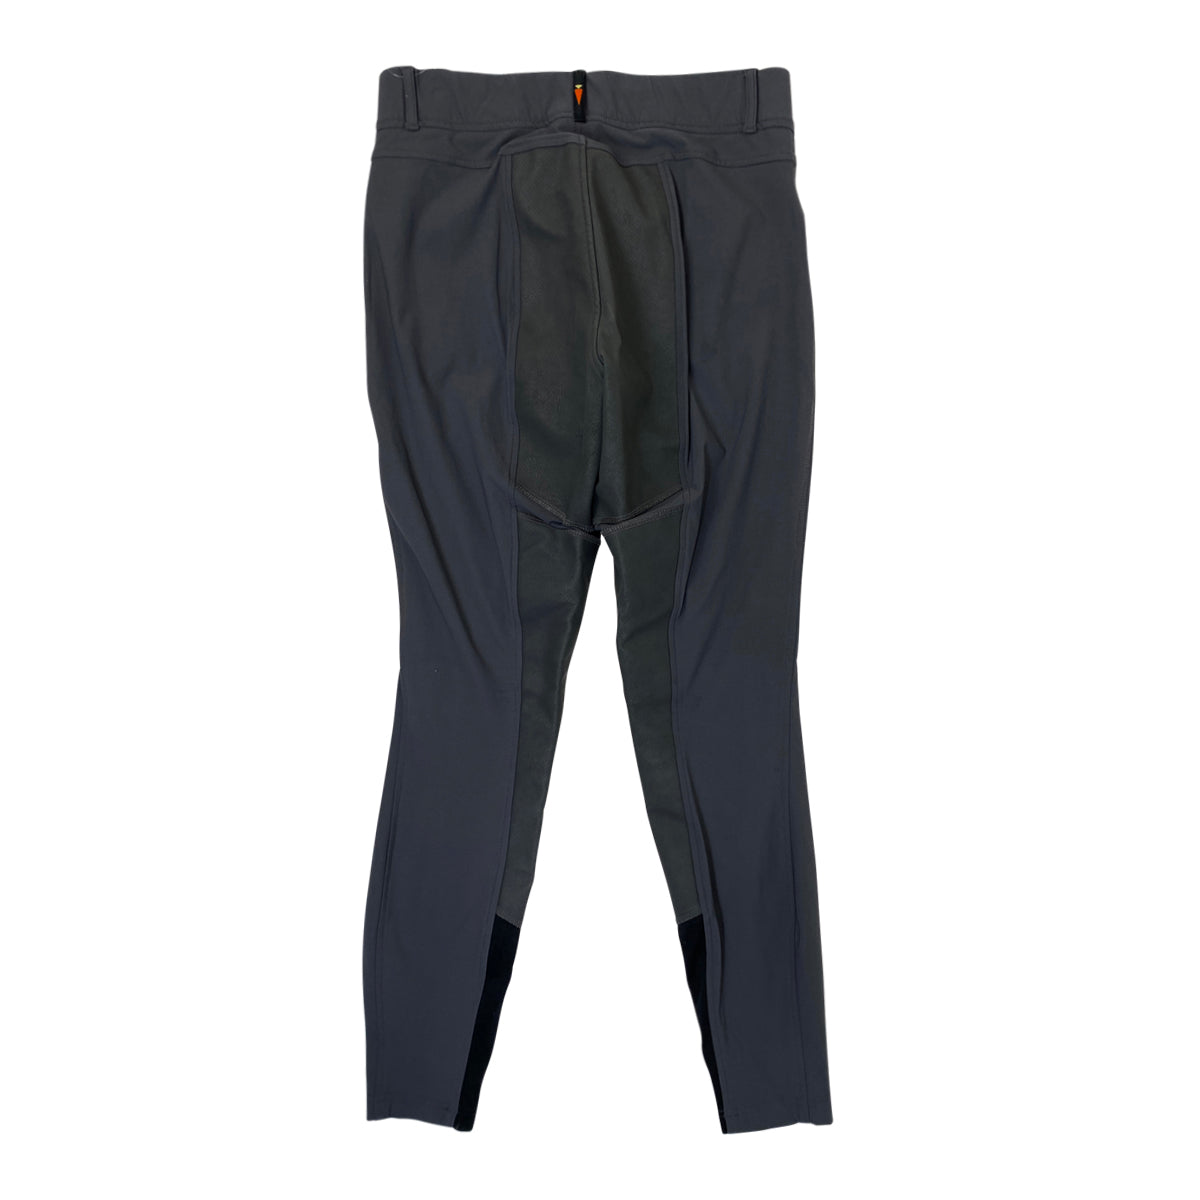 Kerrits 'Crossover' Full Seat Breeches in Grey